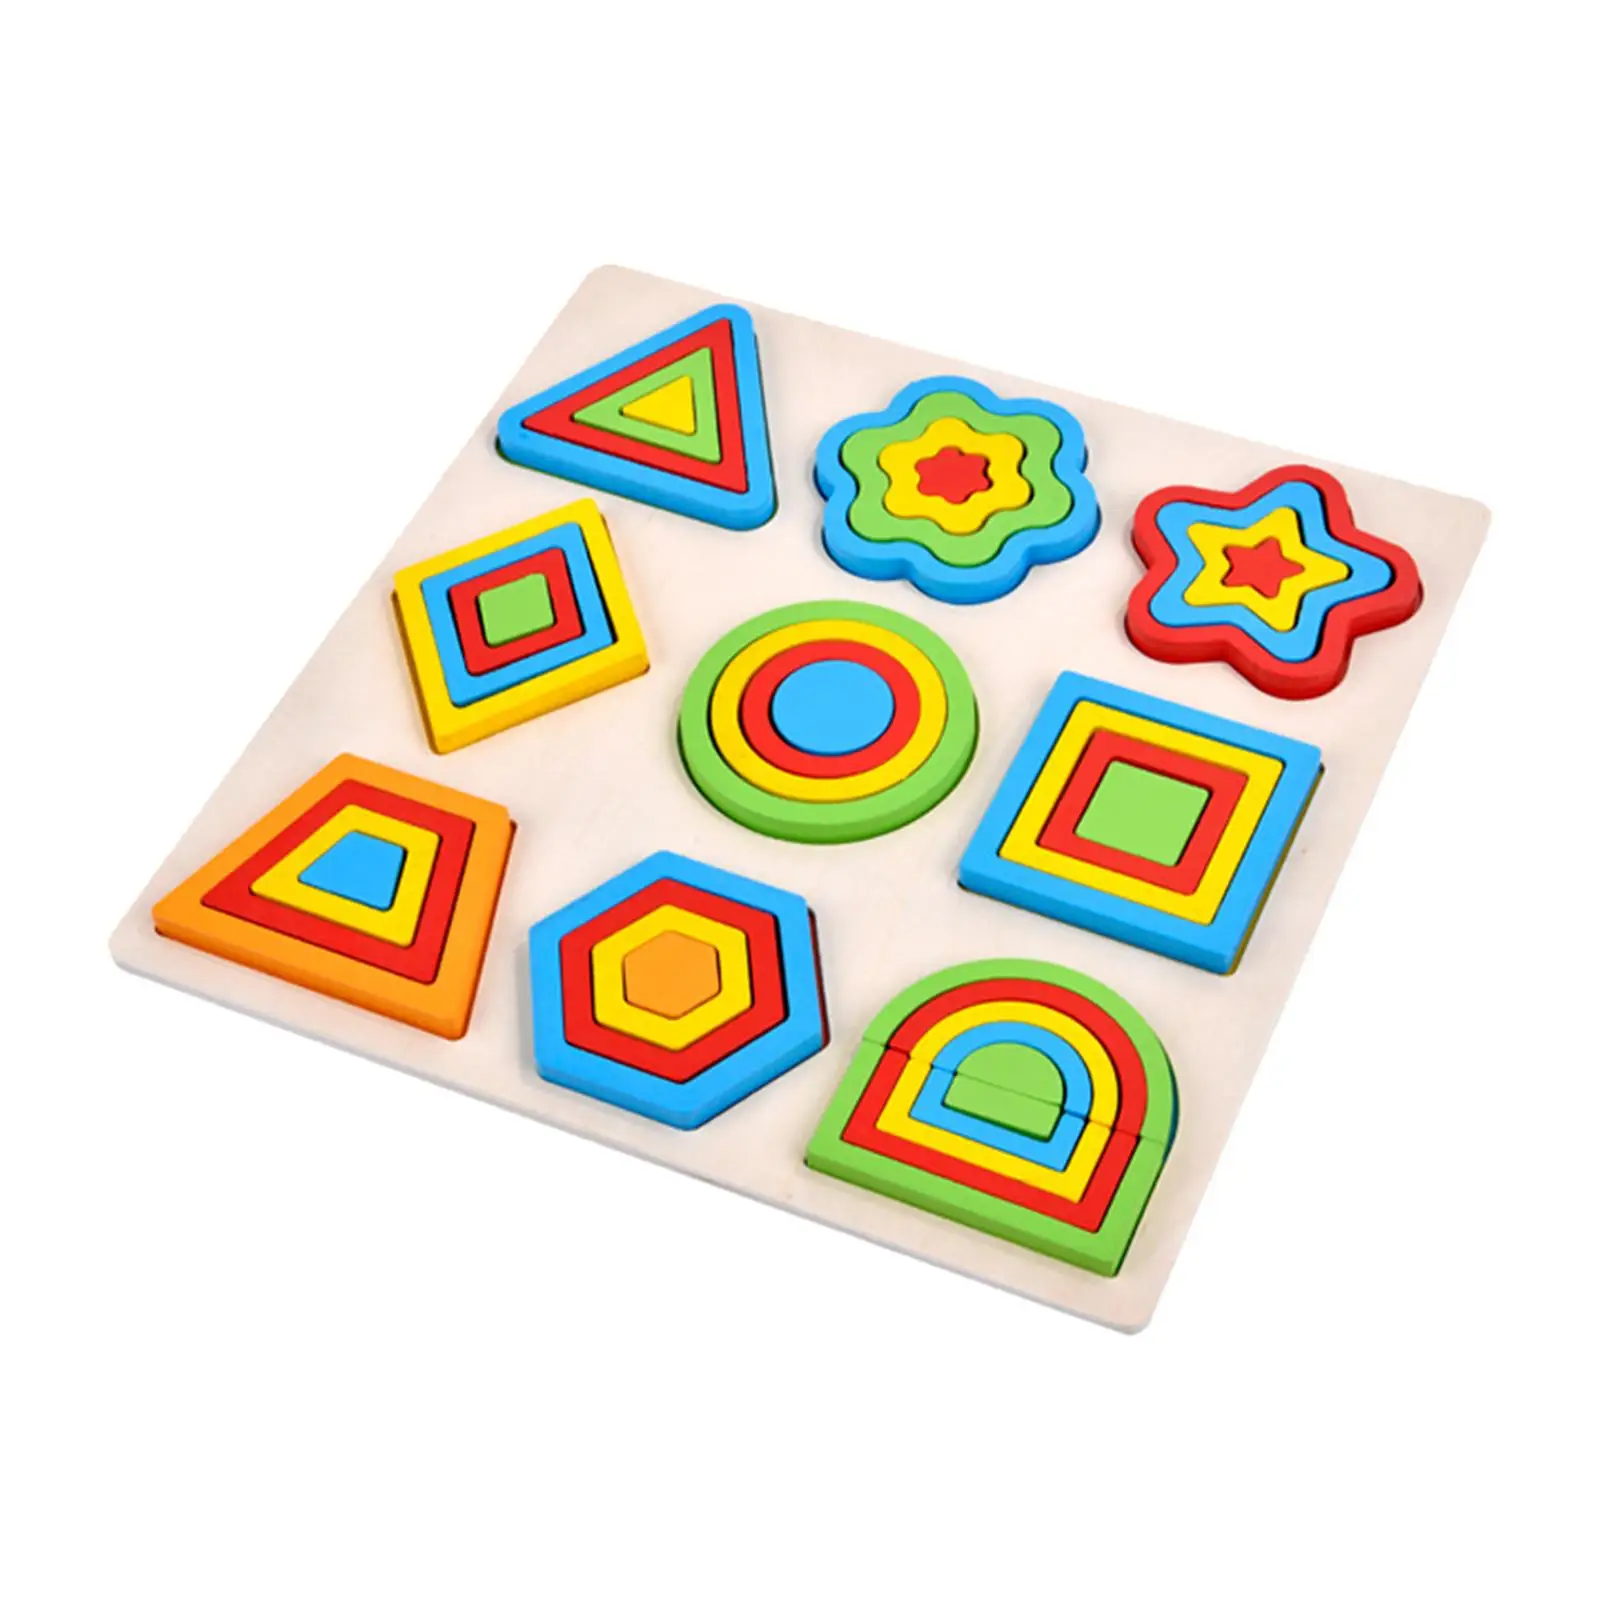 Toddlers Jigsaw Toy Learning Geometry Educational Toy Montessori Shape Sorting Puzzle for Boys Girls Kids Children Birthday Gift